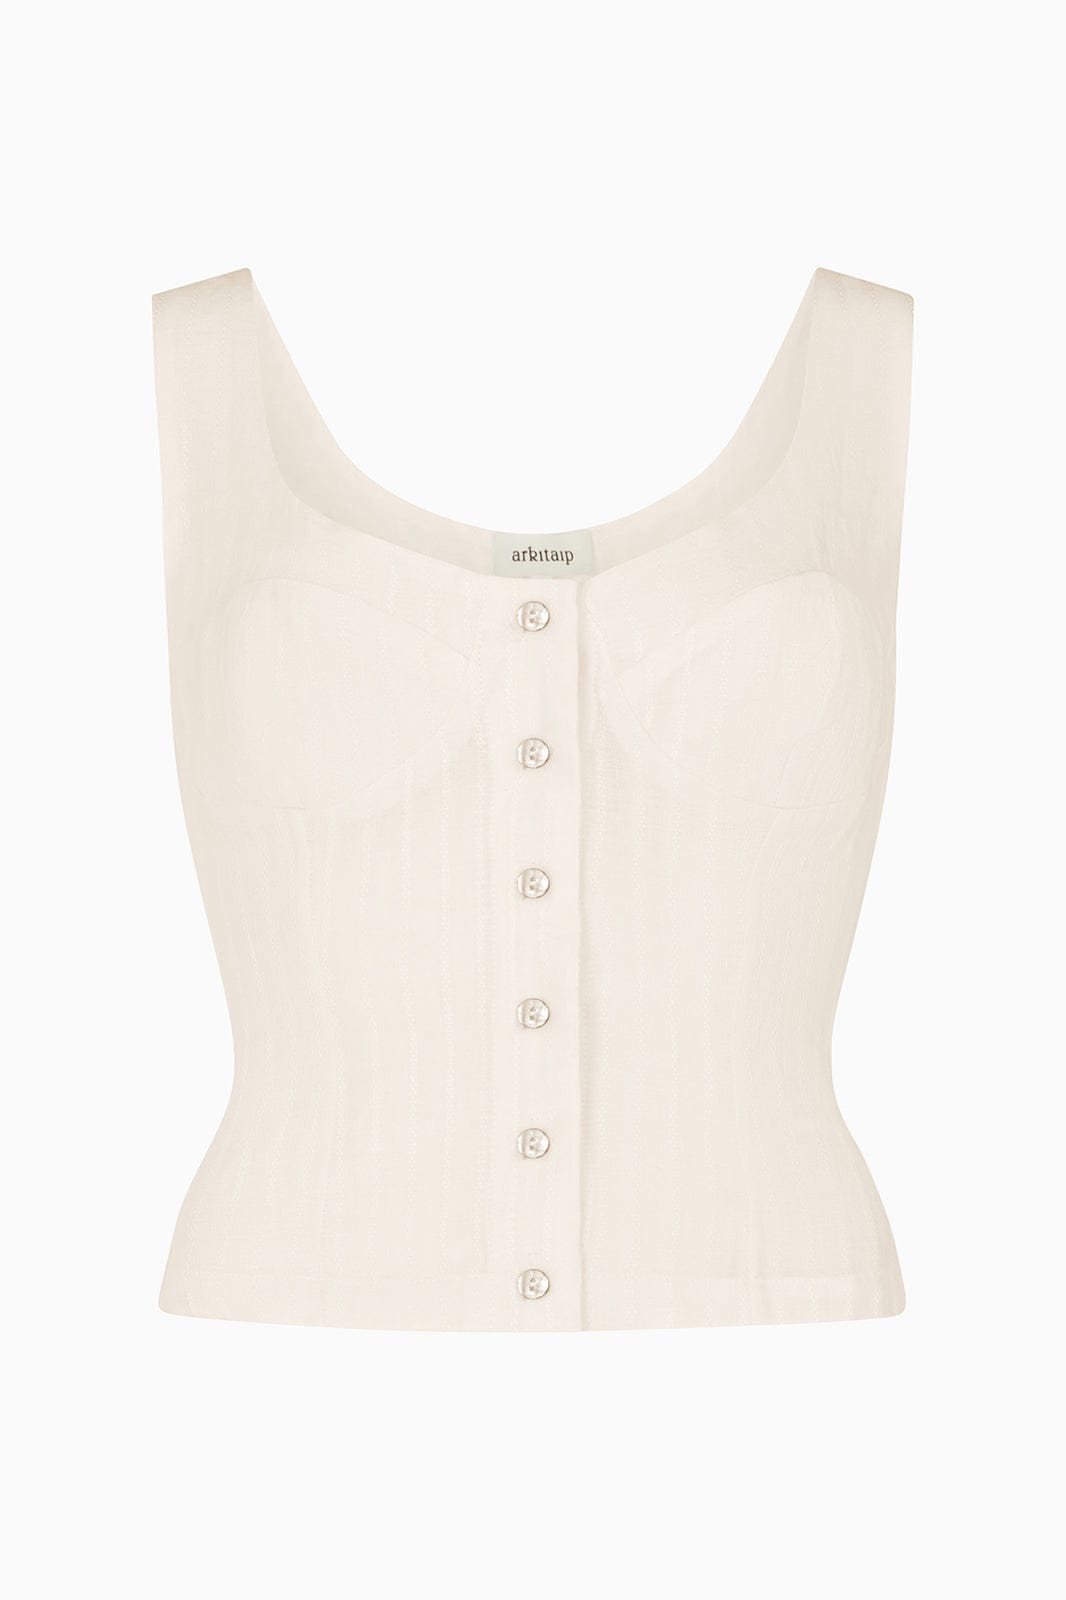 arkitaip Tops The Elena Bustier Top in off-white